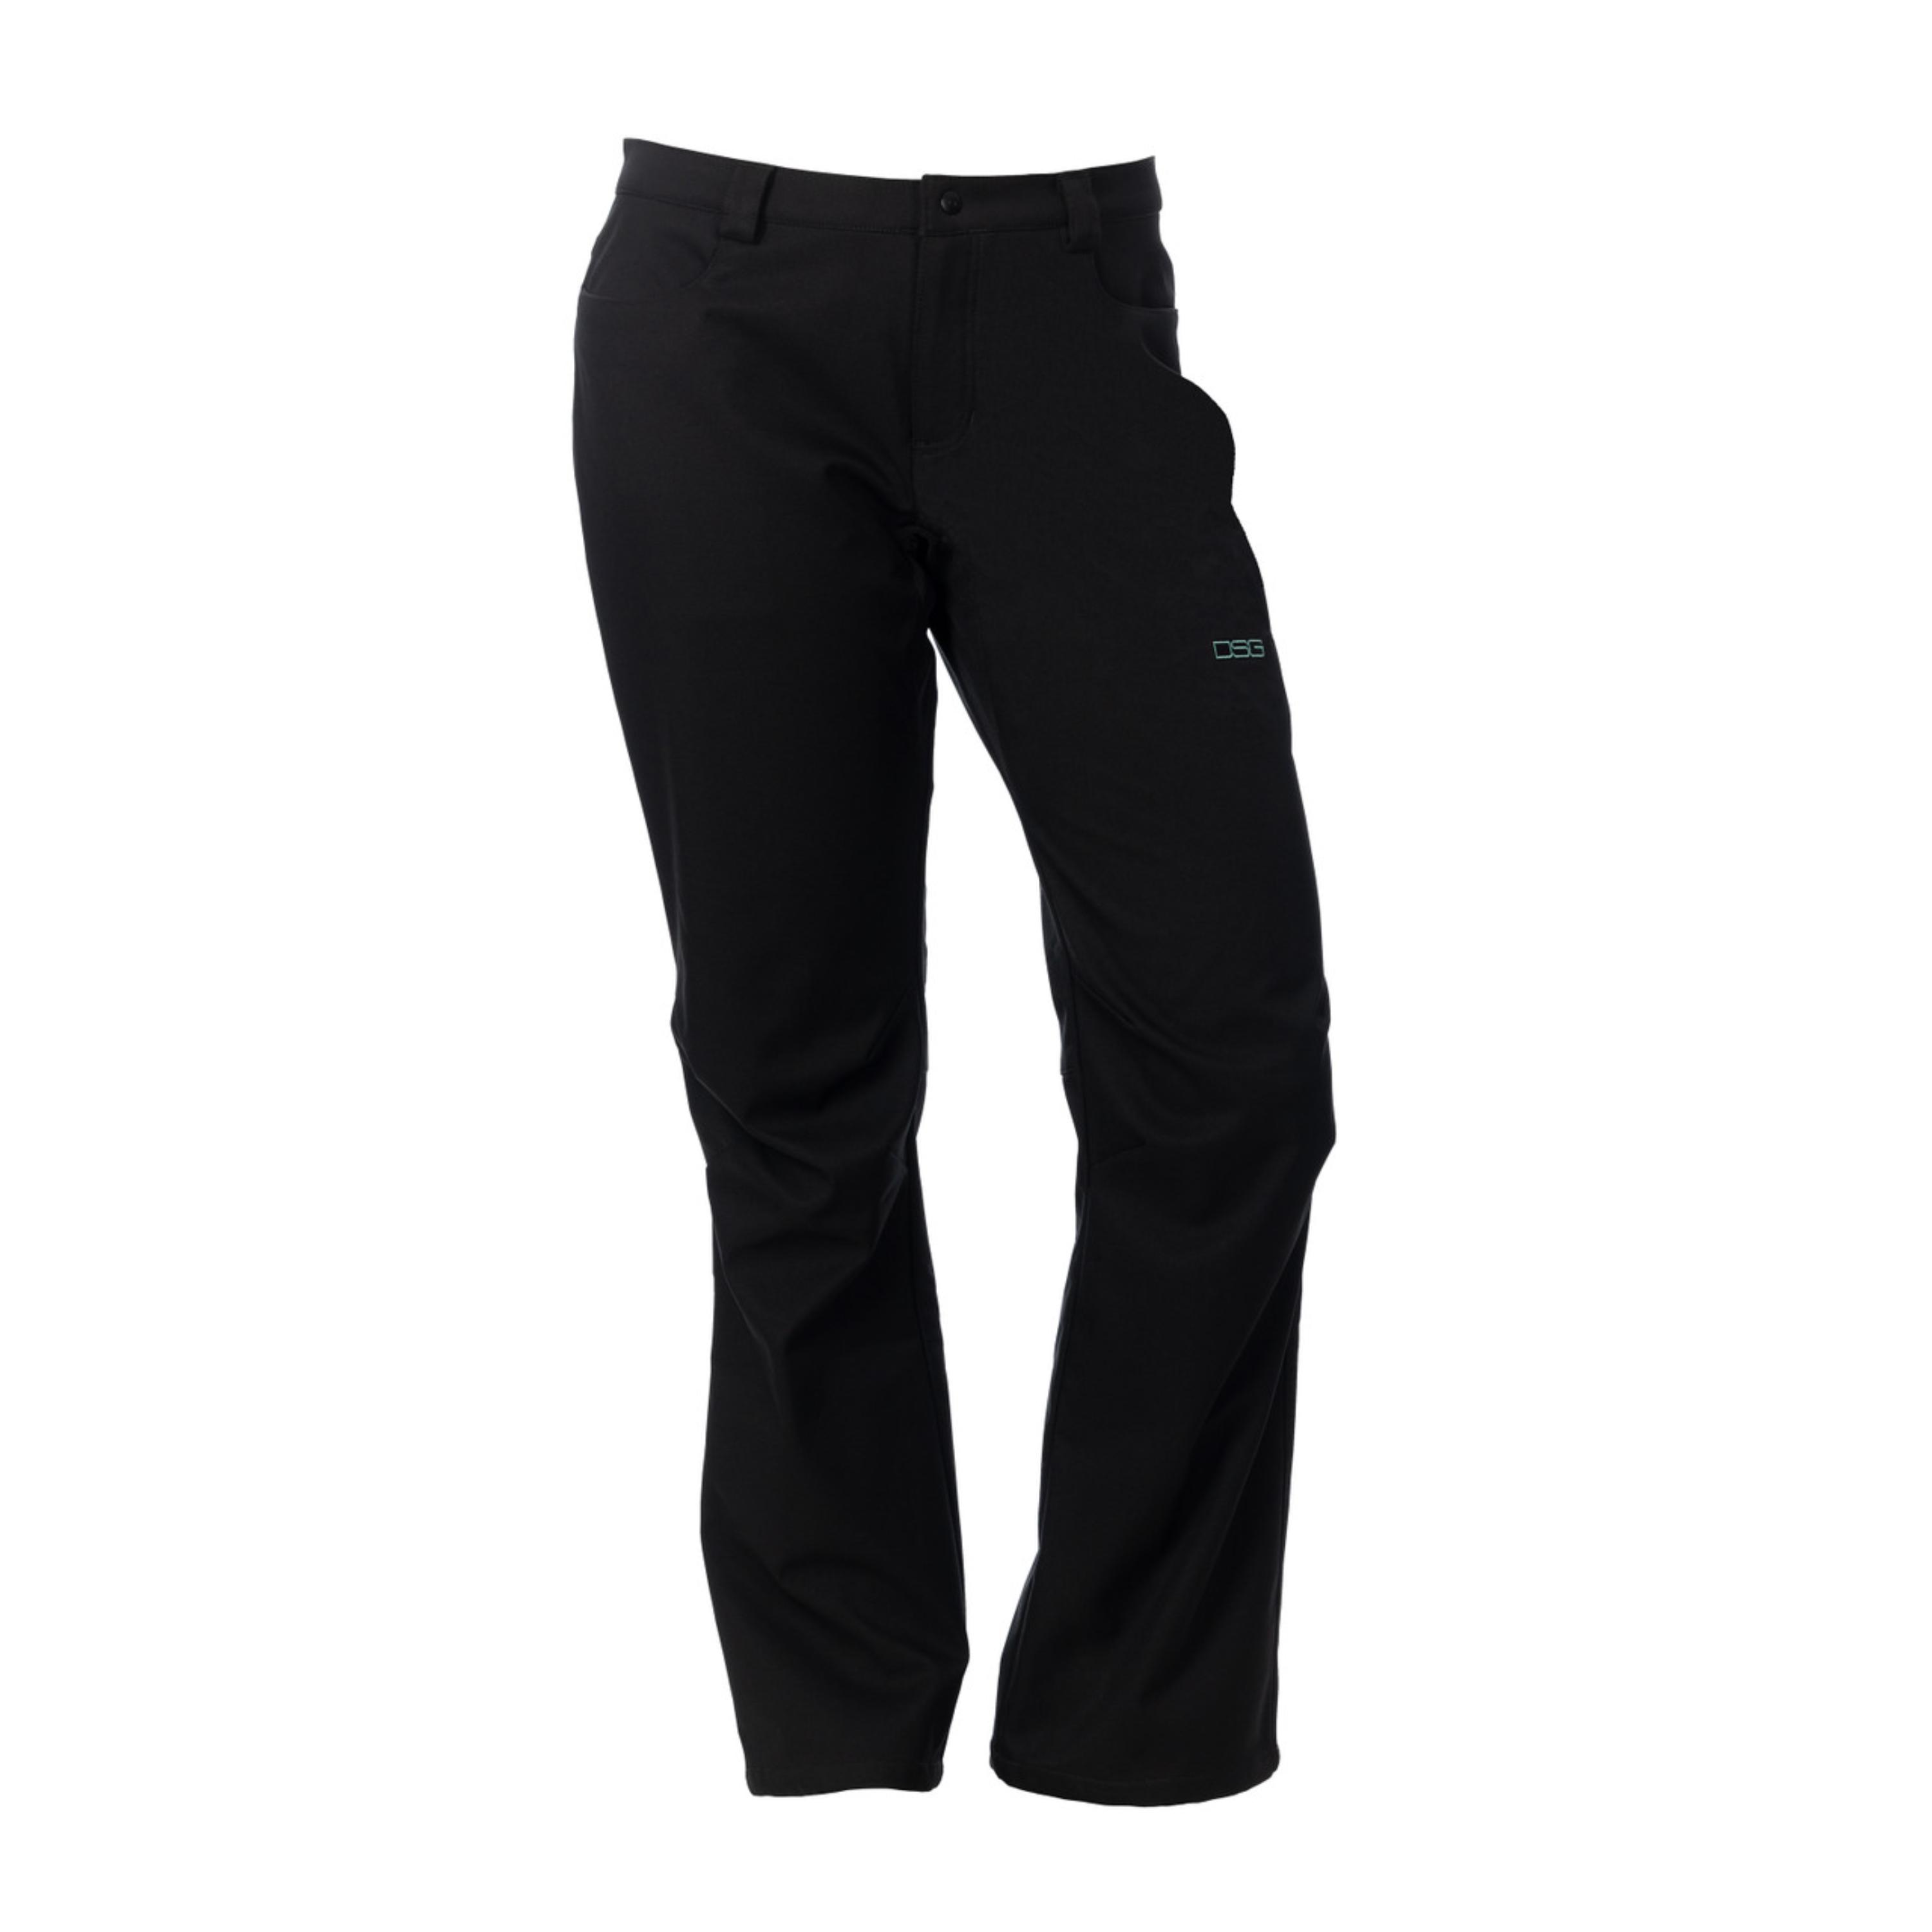 Parliament 4S Designs Everyday Pant - Charcoal